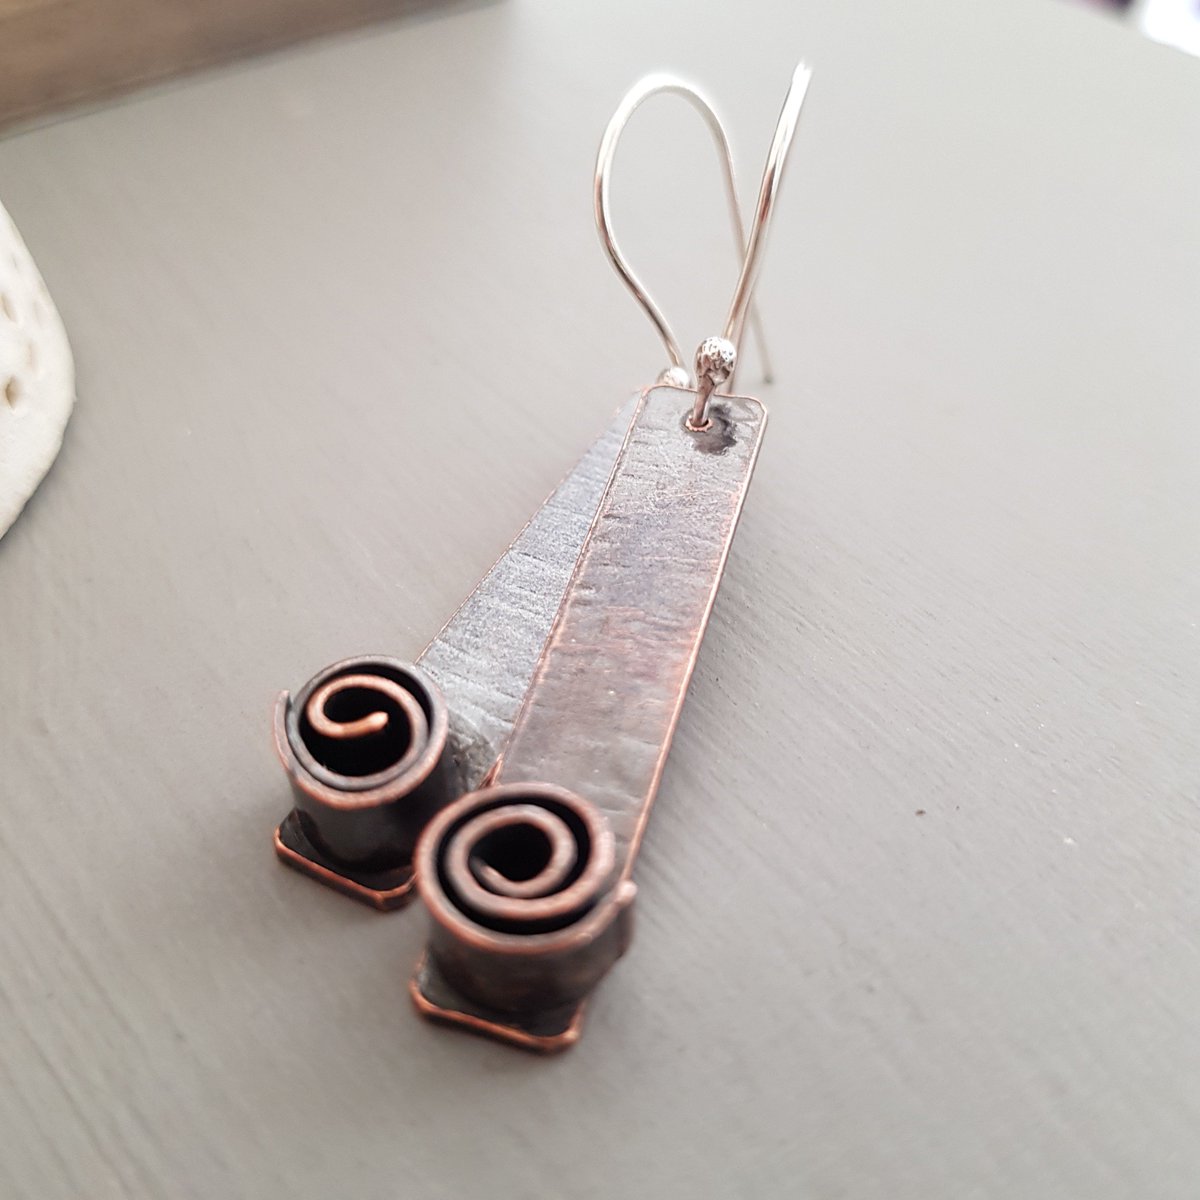 For your English Rose!
etsy.me/2HH6DB2 via @Etsy
#copperrose #copperearrings #earrings #handmadeearrings #hmuk #craftbuzz #earlybiz #onlinecraft #spiral #lonelycovejewellery #copperjewelry #copperanniversary